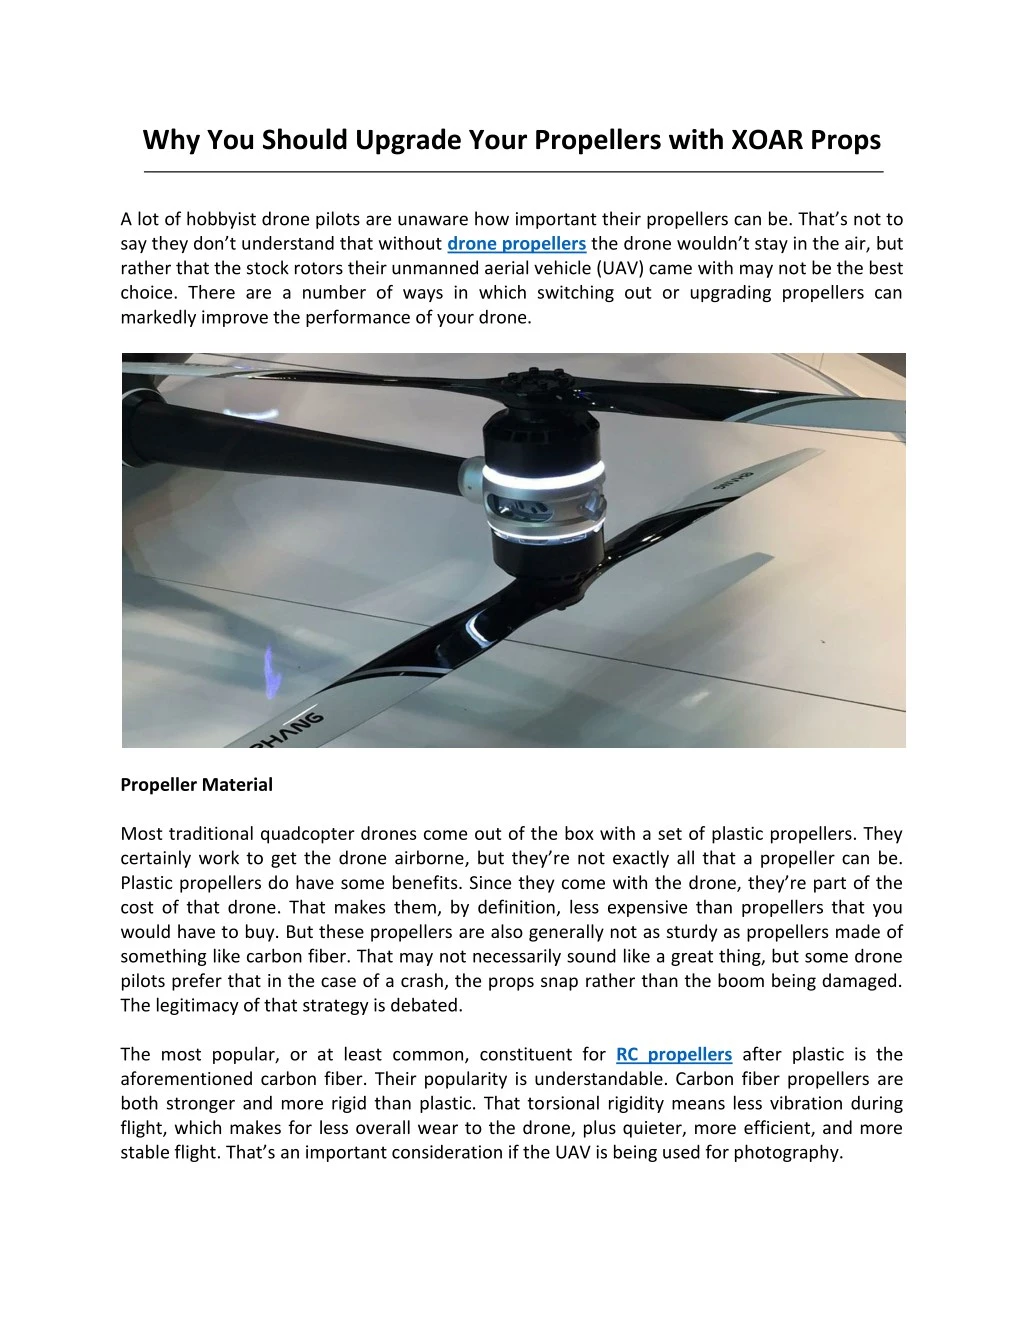 why you should upgrade your propellers with xoar